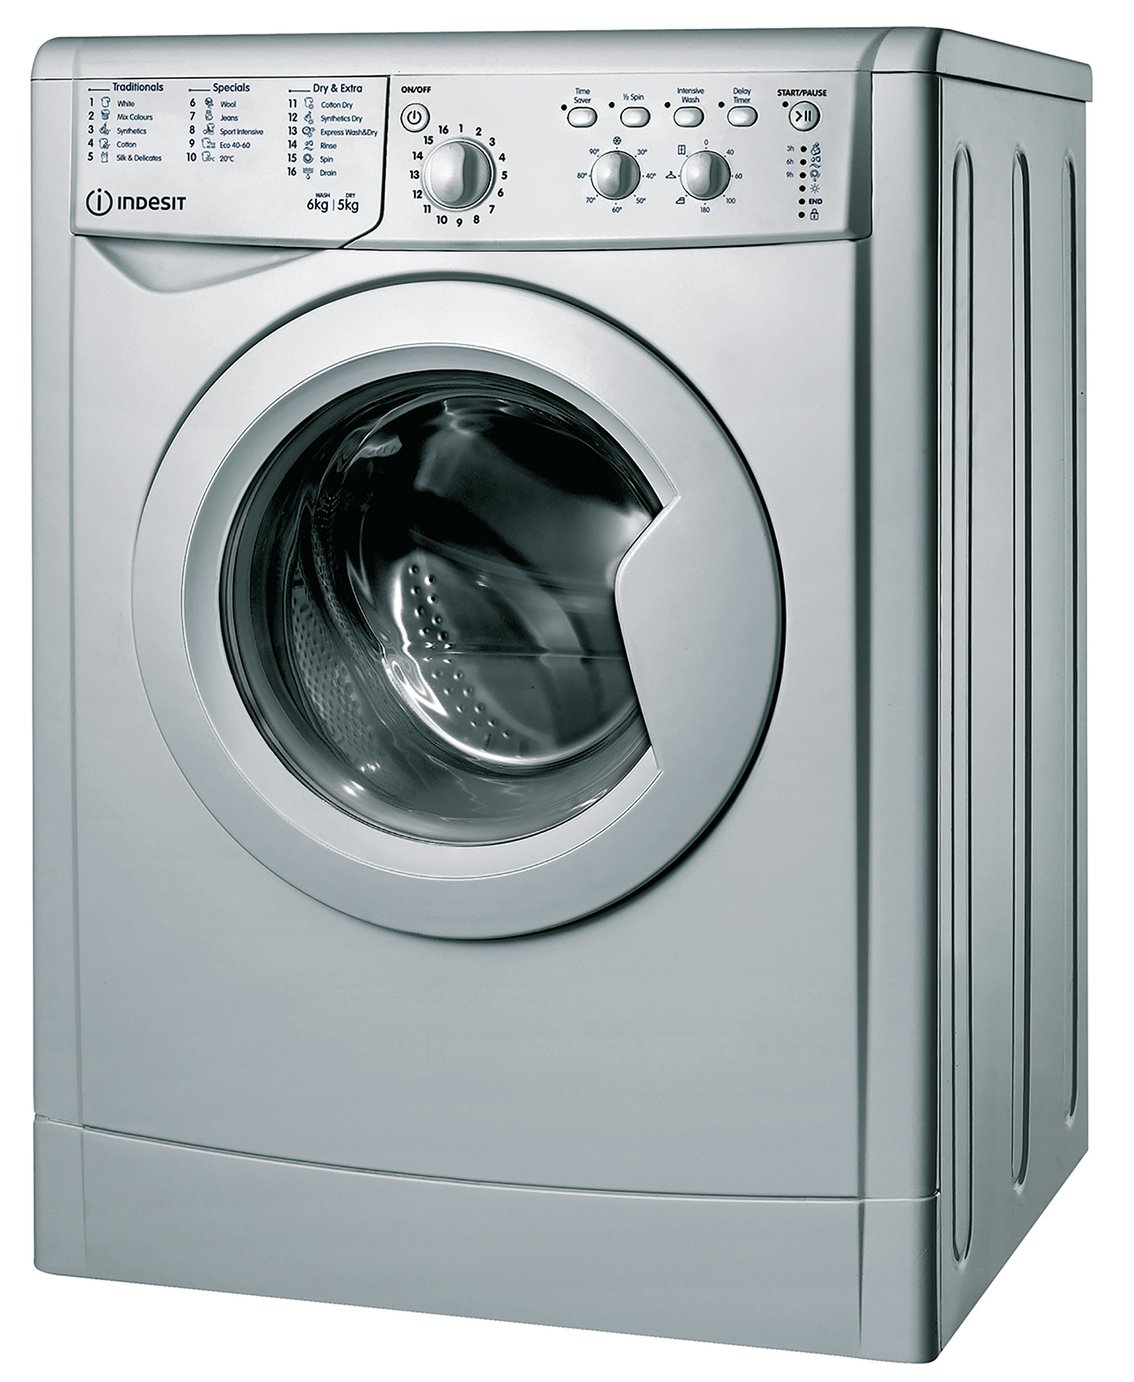 Cheap Integrated Washer Dryers at Argos, Tesco, ASDA, Currys, AO, Very